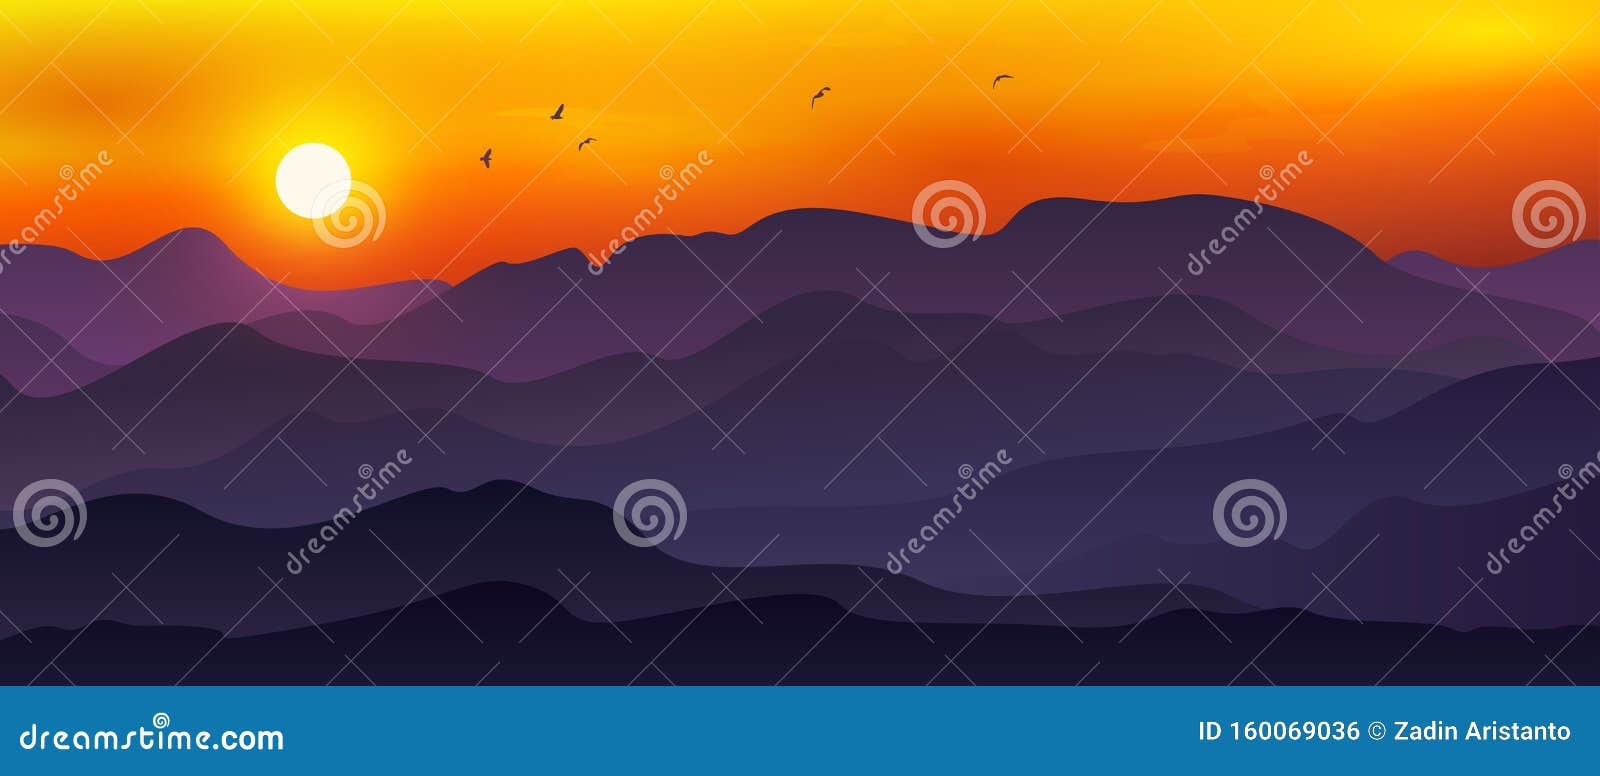  of vast mountain landscape combined with moon/sun, orange sky and flying birds